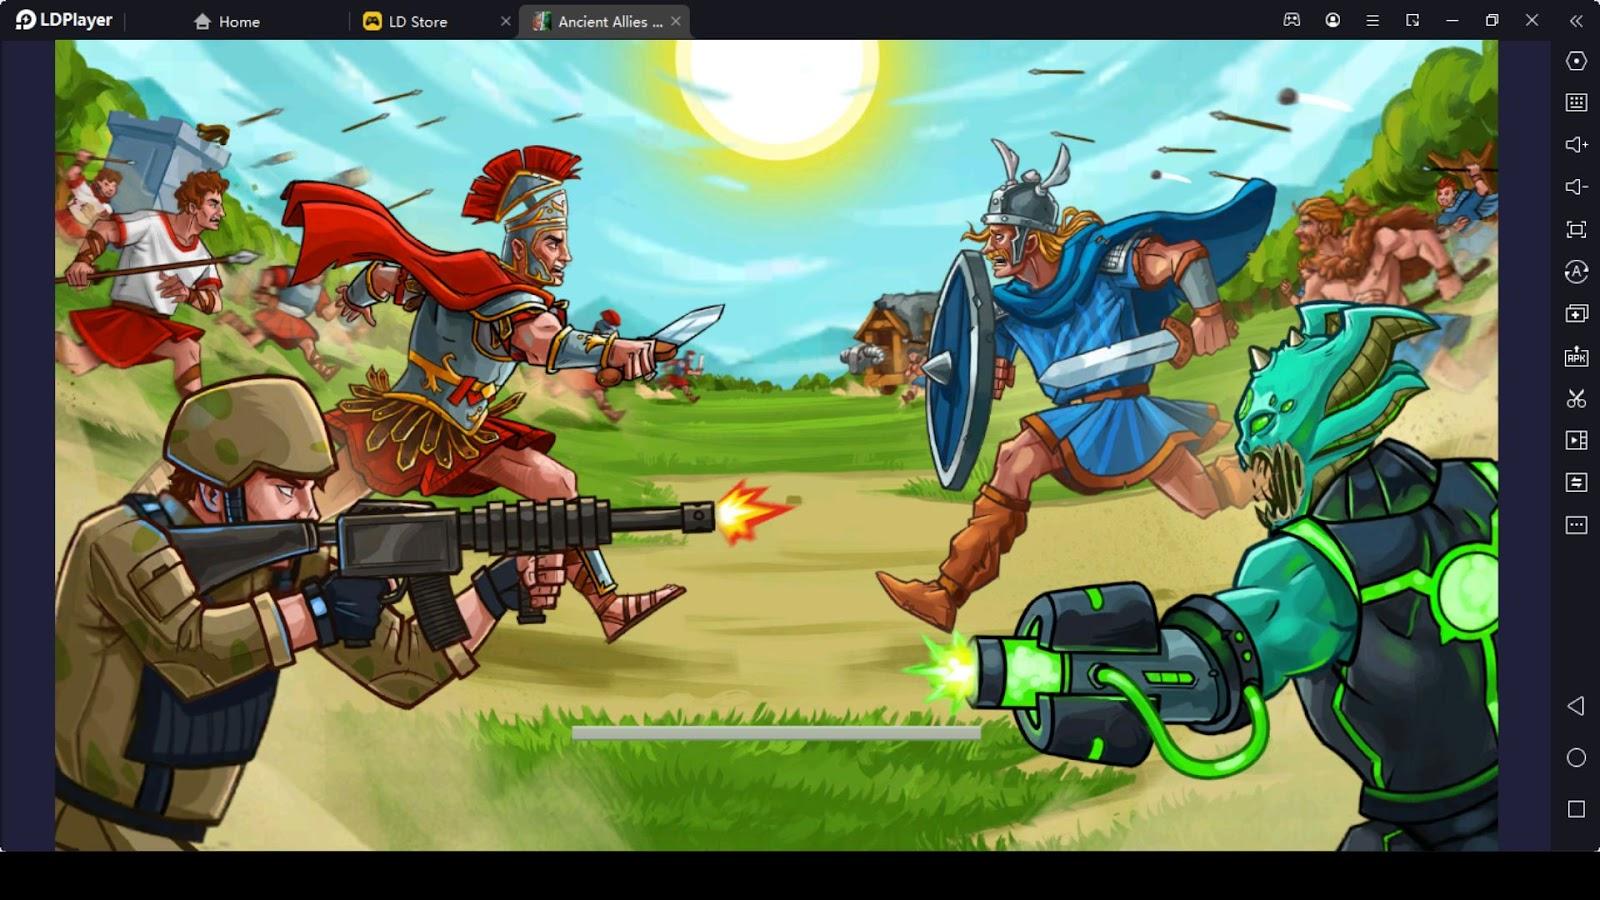 Download Intense Action in a Tower Defense Game Wallpaper